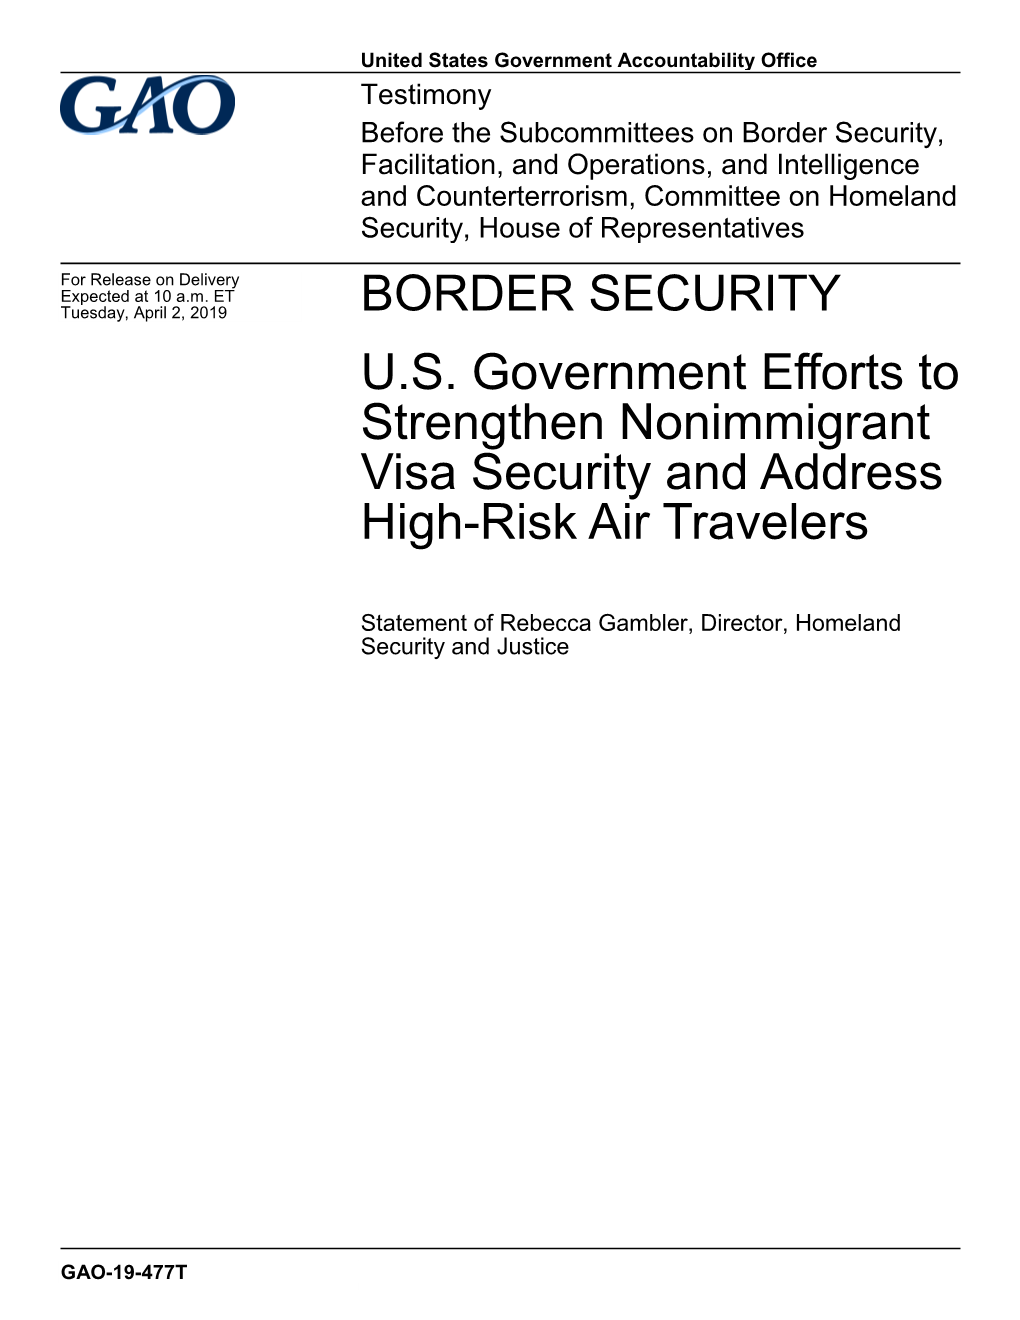 US Government Efforts to Strengthen Nonimmigrant Visa Security And